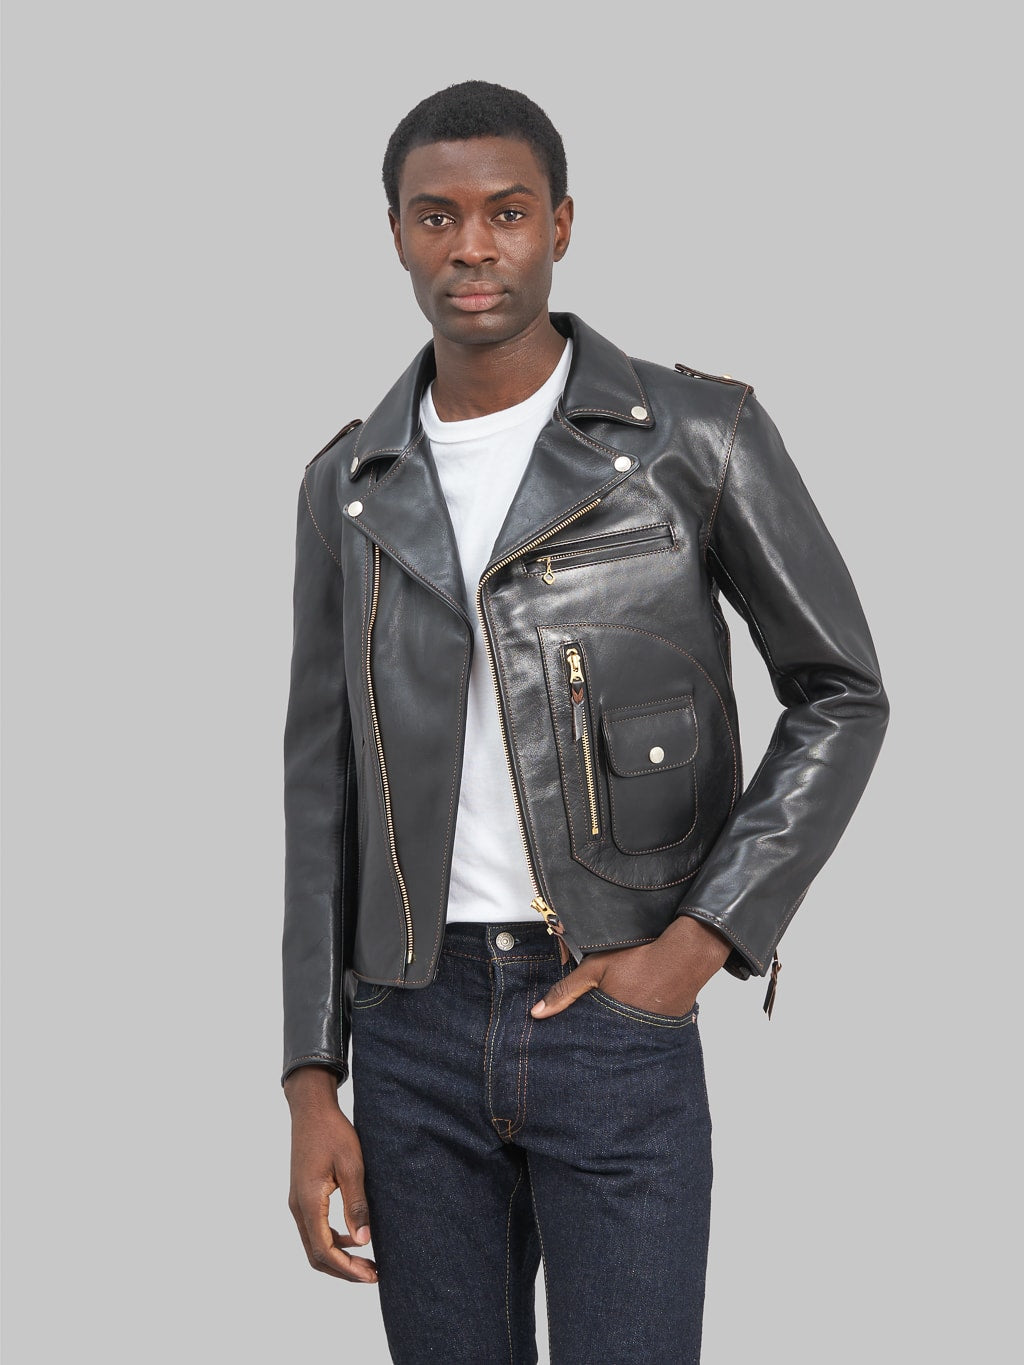 The Flat Head Horsehide leather double Riders Jacket Black Semi Aniline style